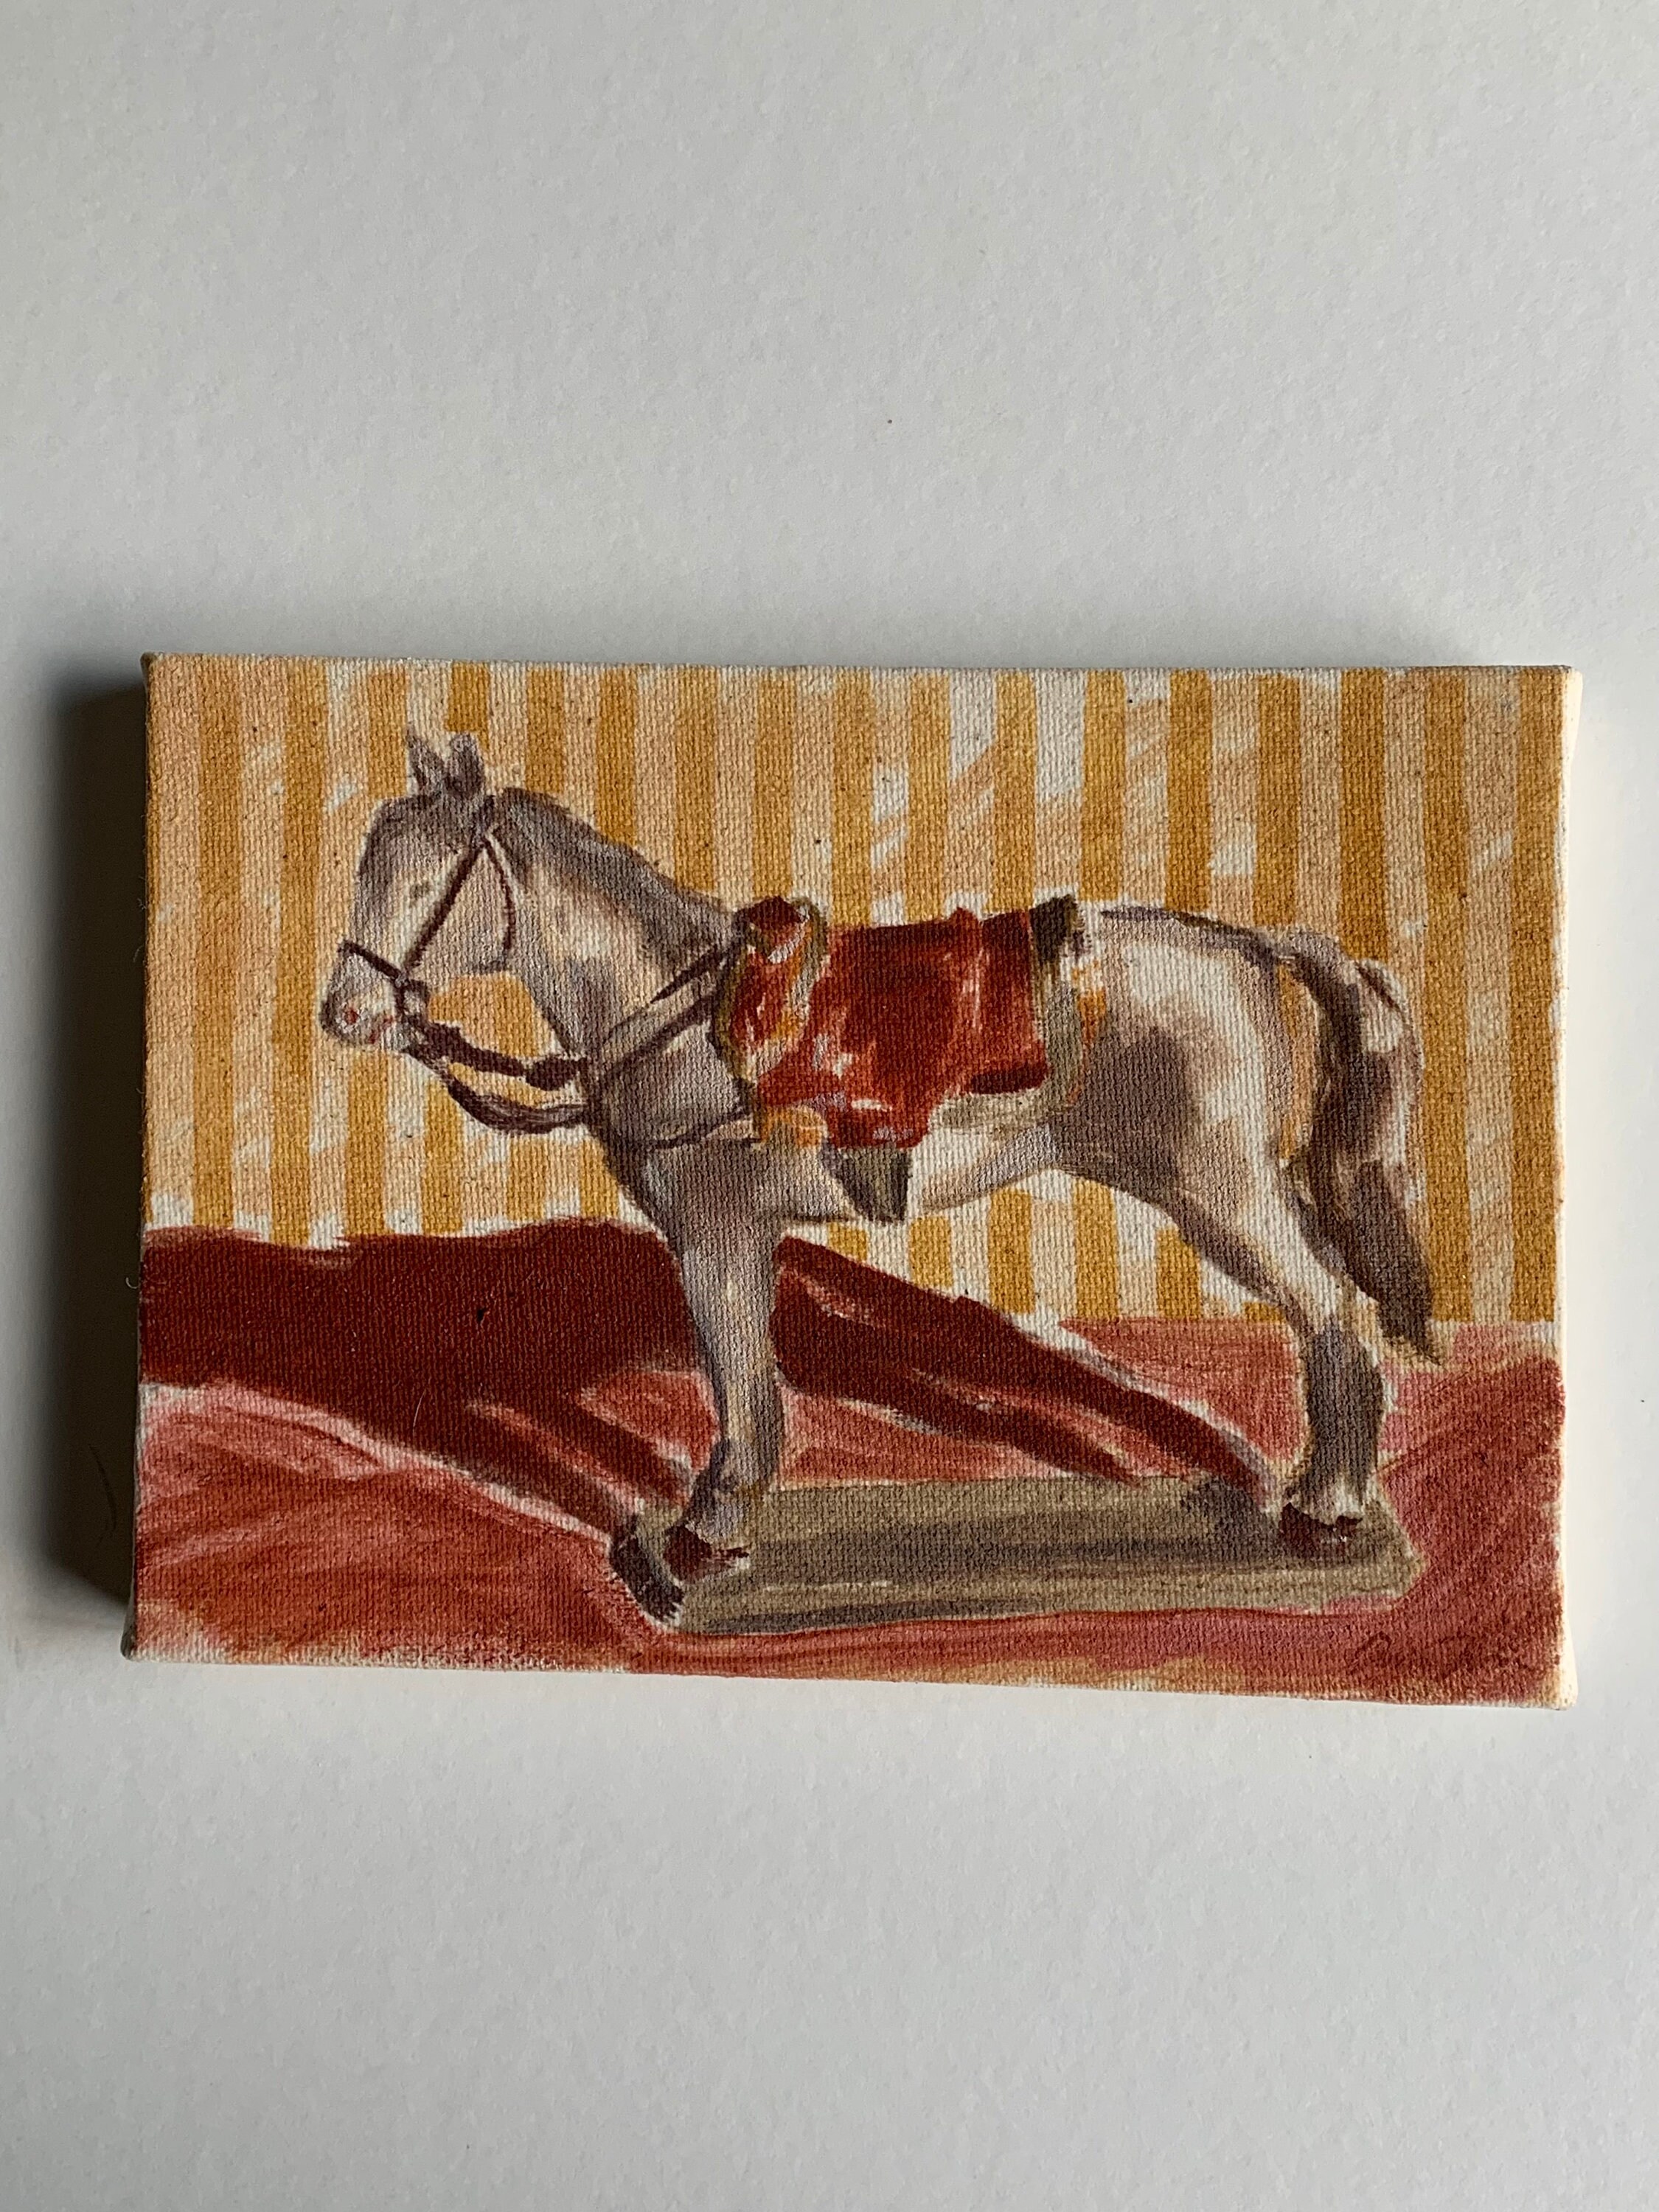 Horse Expressive Eyes Wallsculpture Hand-cast and Painted Tile Art Gift 